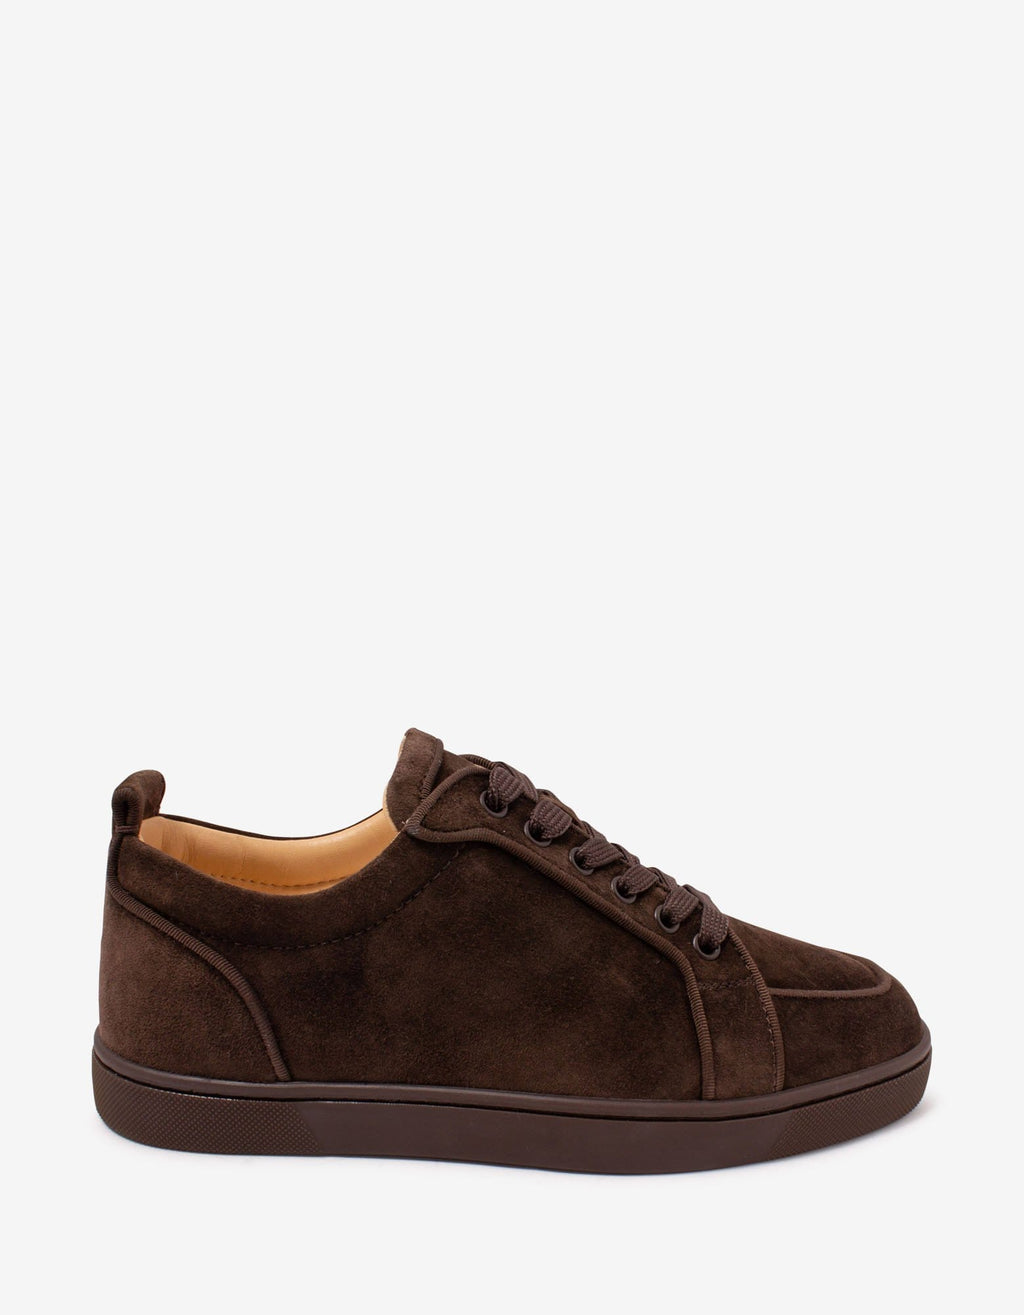 Christian Louboutin Rantulow Orlato Brown Suede Leather Trainers